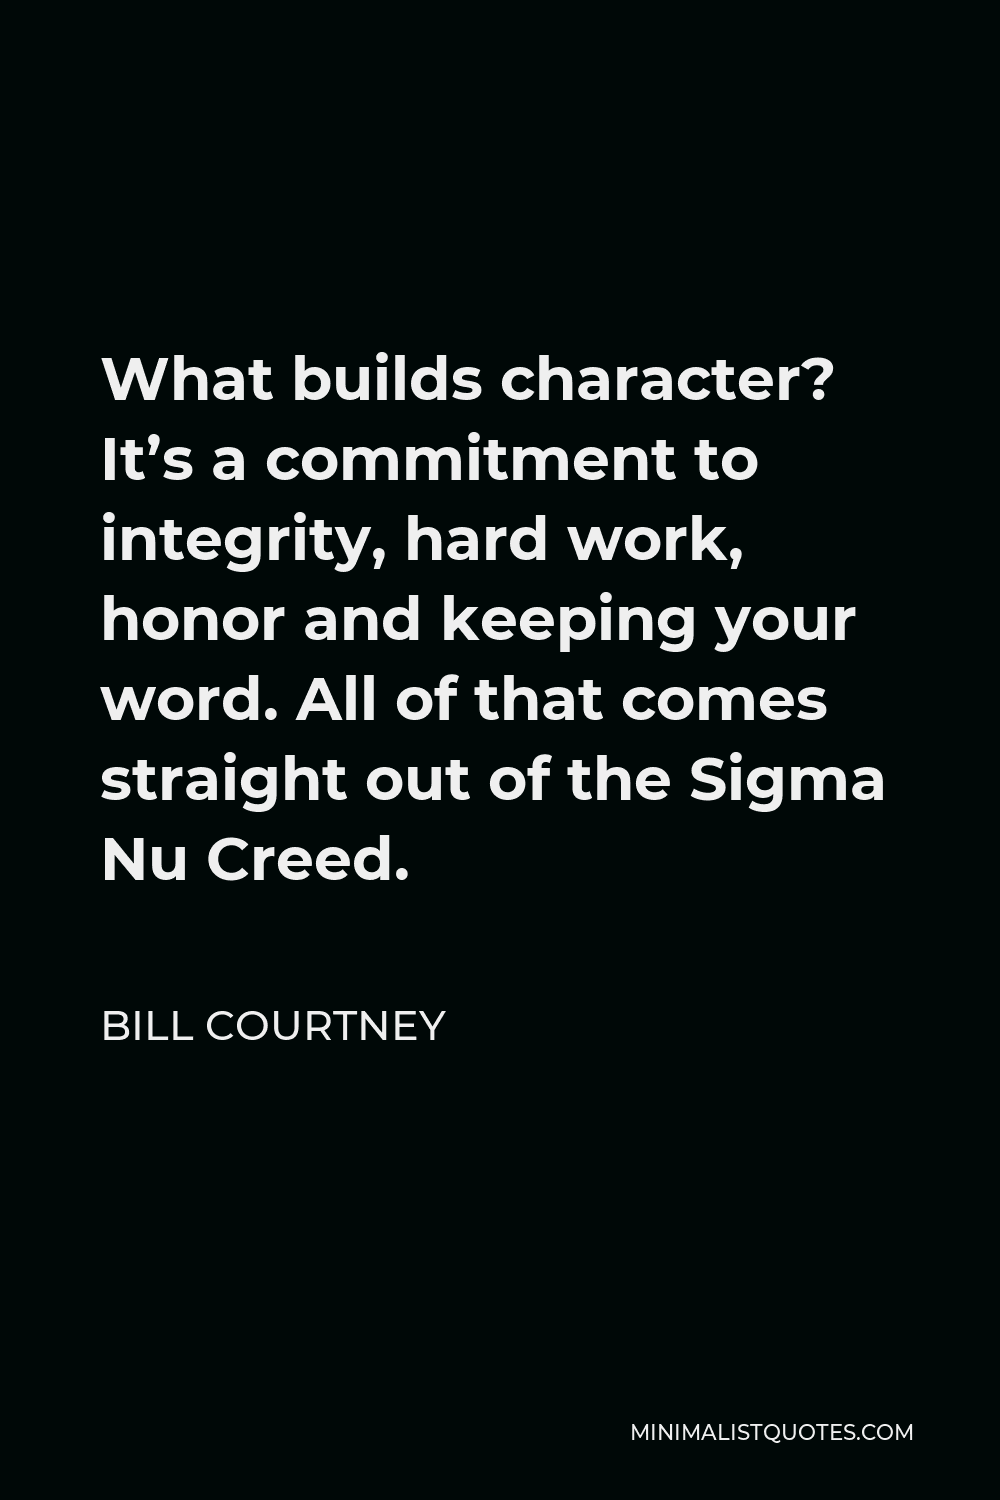 Bill Courtney Quote - What builds character? It’s a commitment to integrity, hard work, honor and keeping your word. All of that comes straight out of the Sigma Nu Creed.